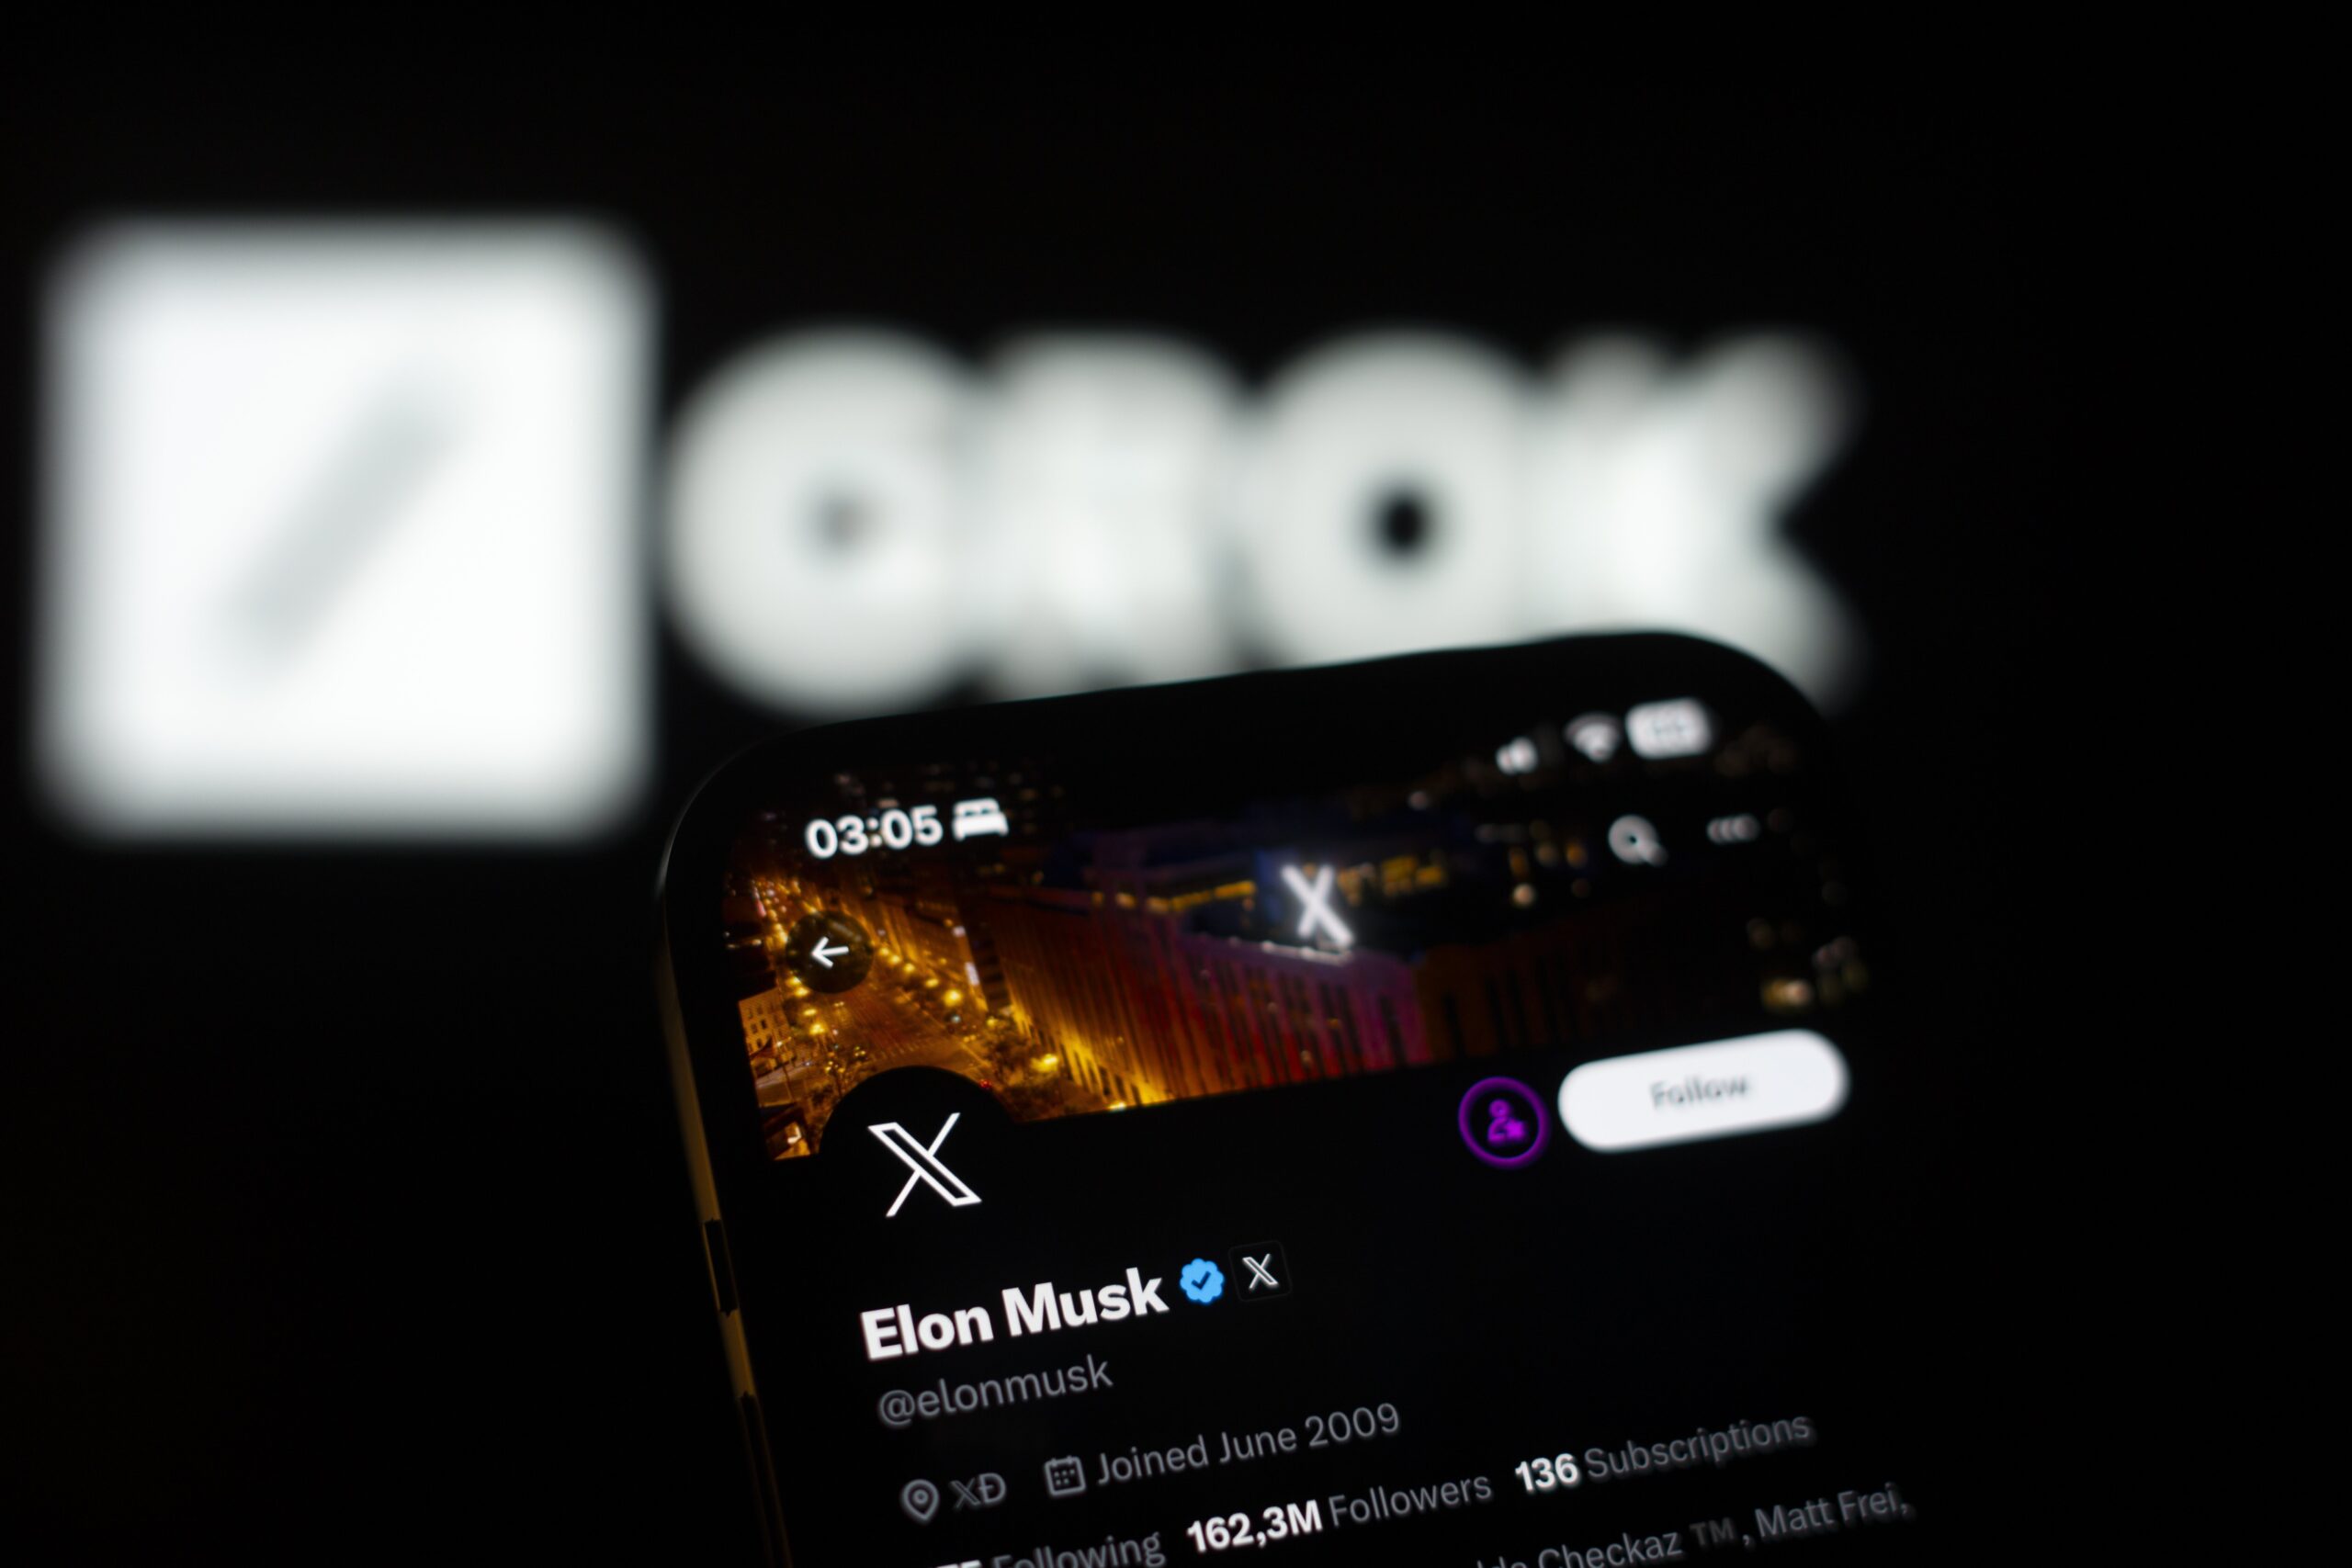 Elon Musk's X account with Grok logo in the background